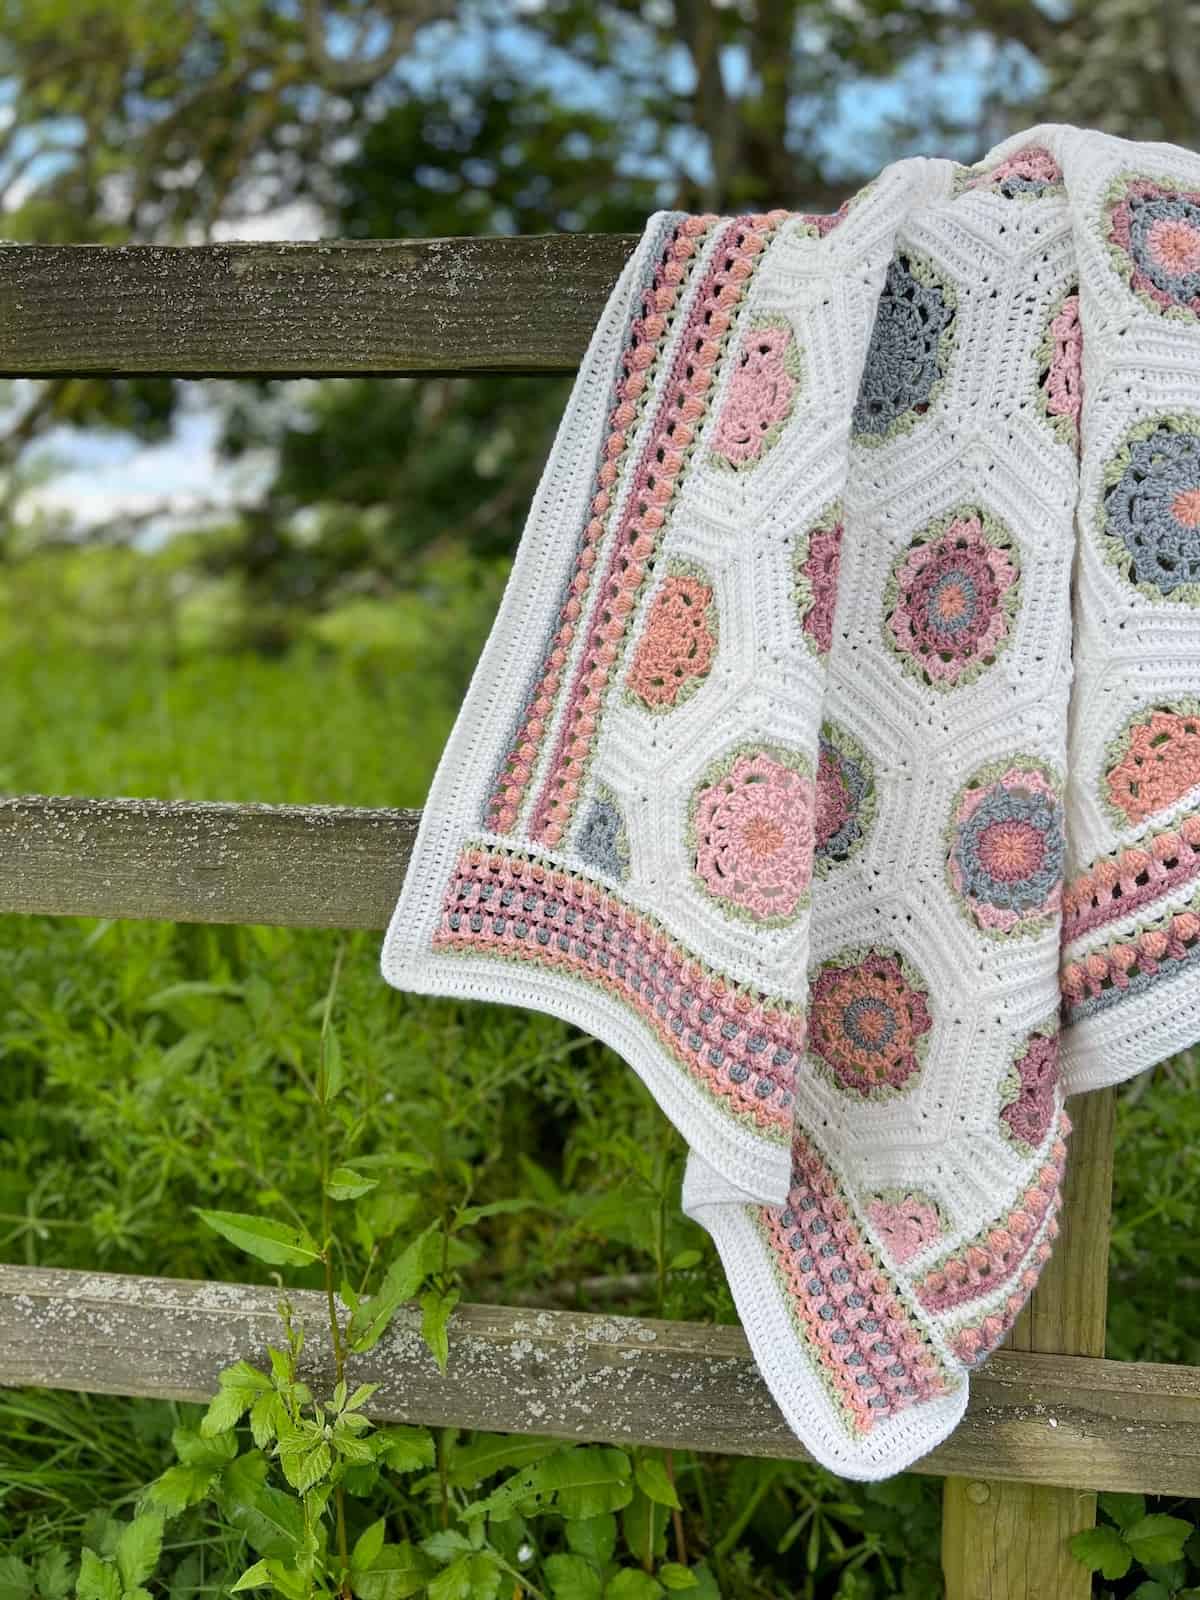 Floral crochet blanket draped over a gate in a field.